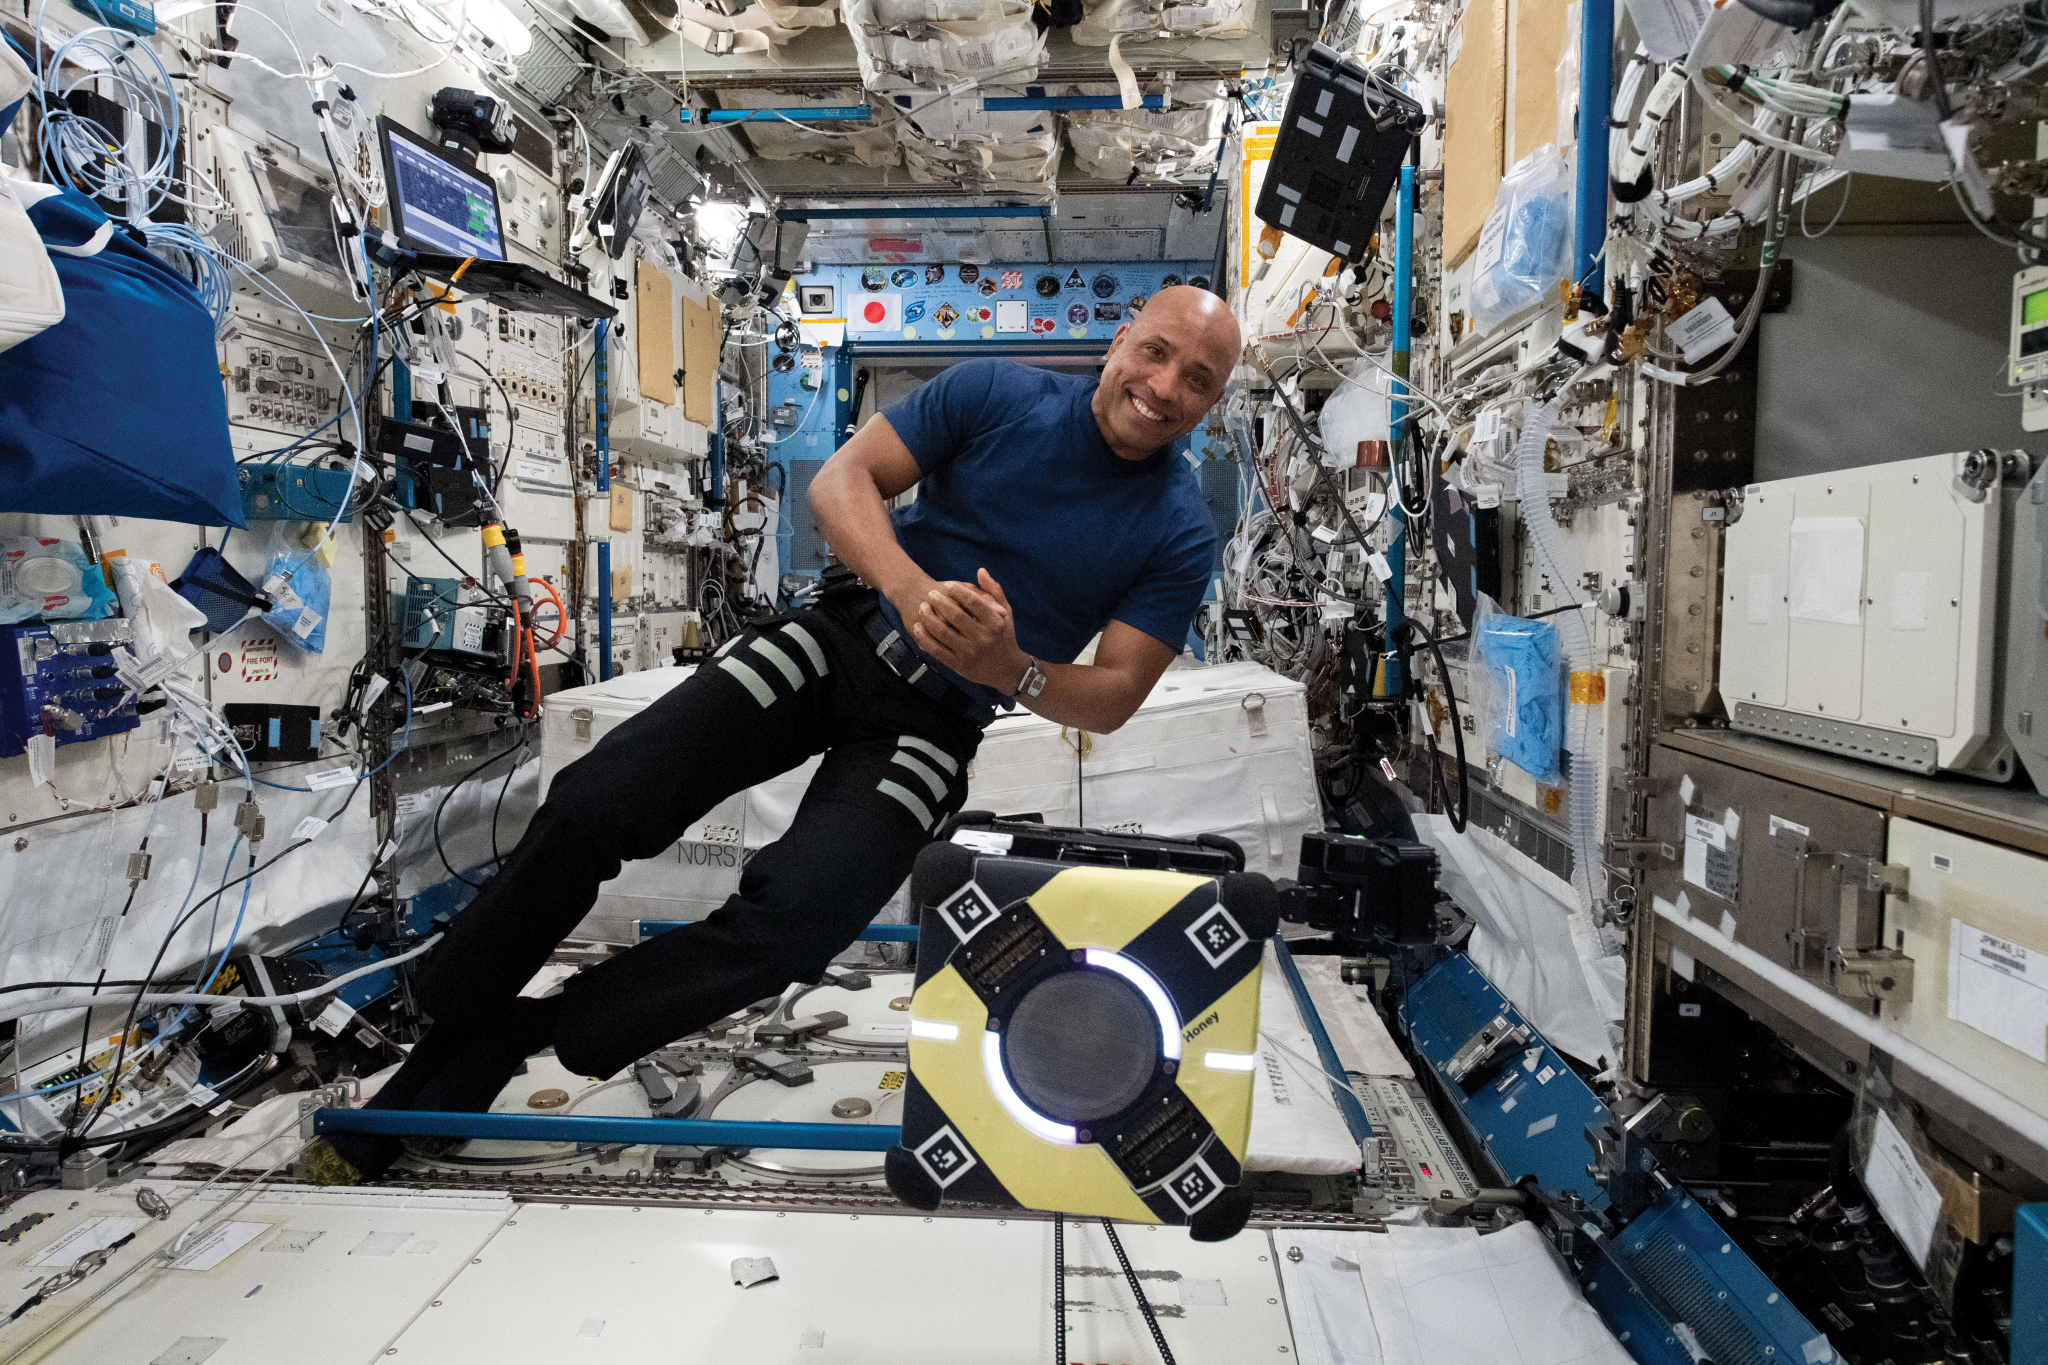 image of an astronaut working with flying robots